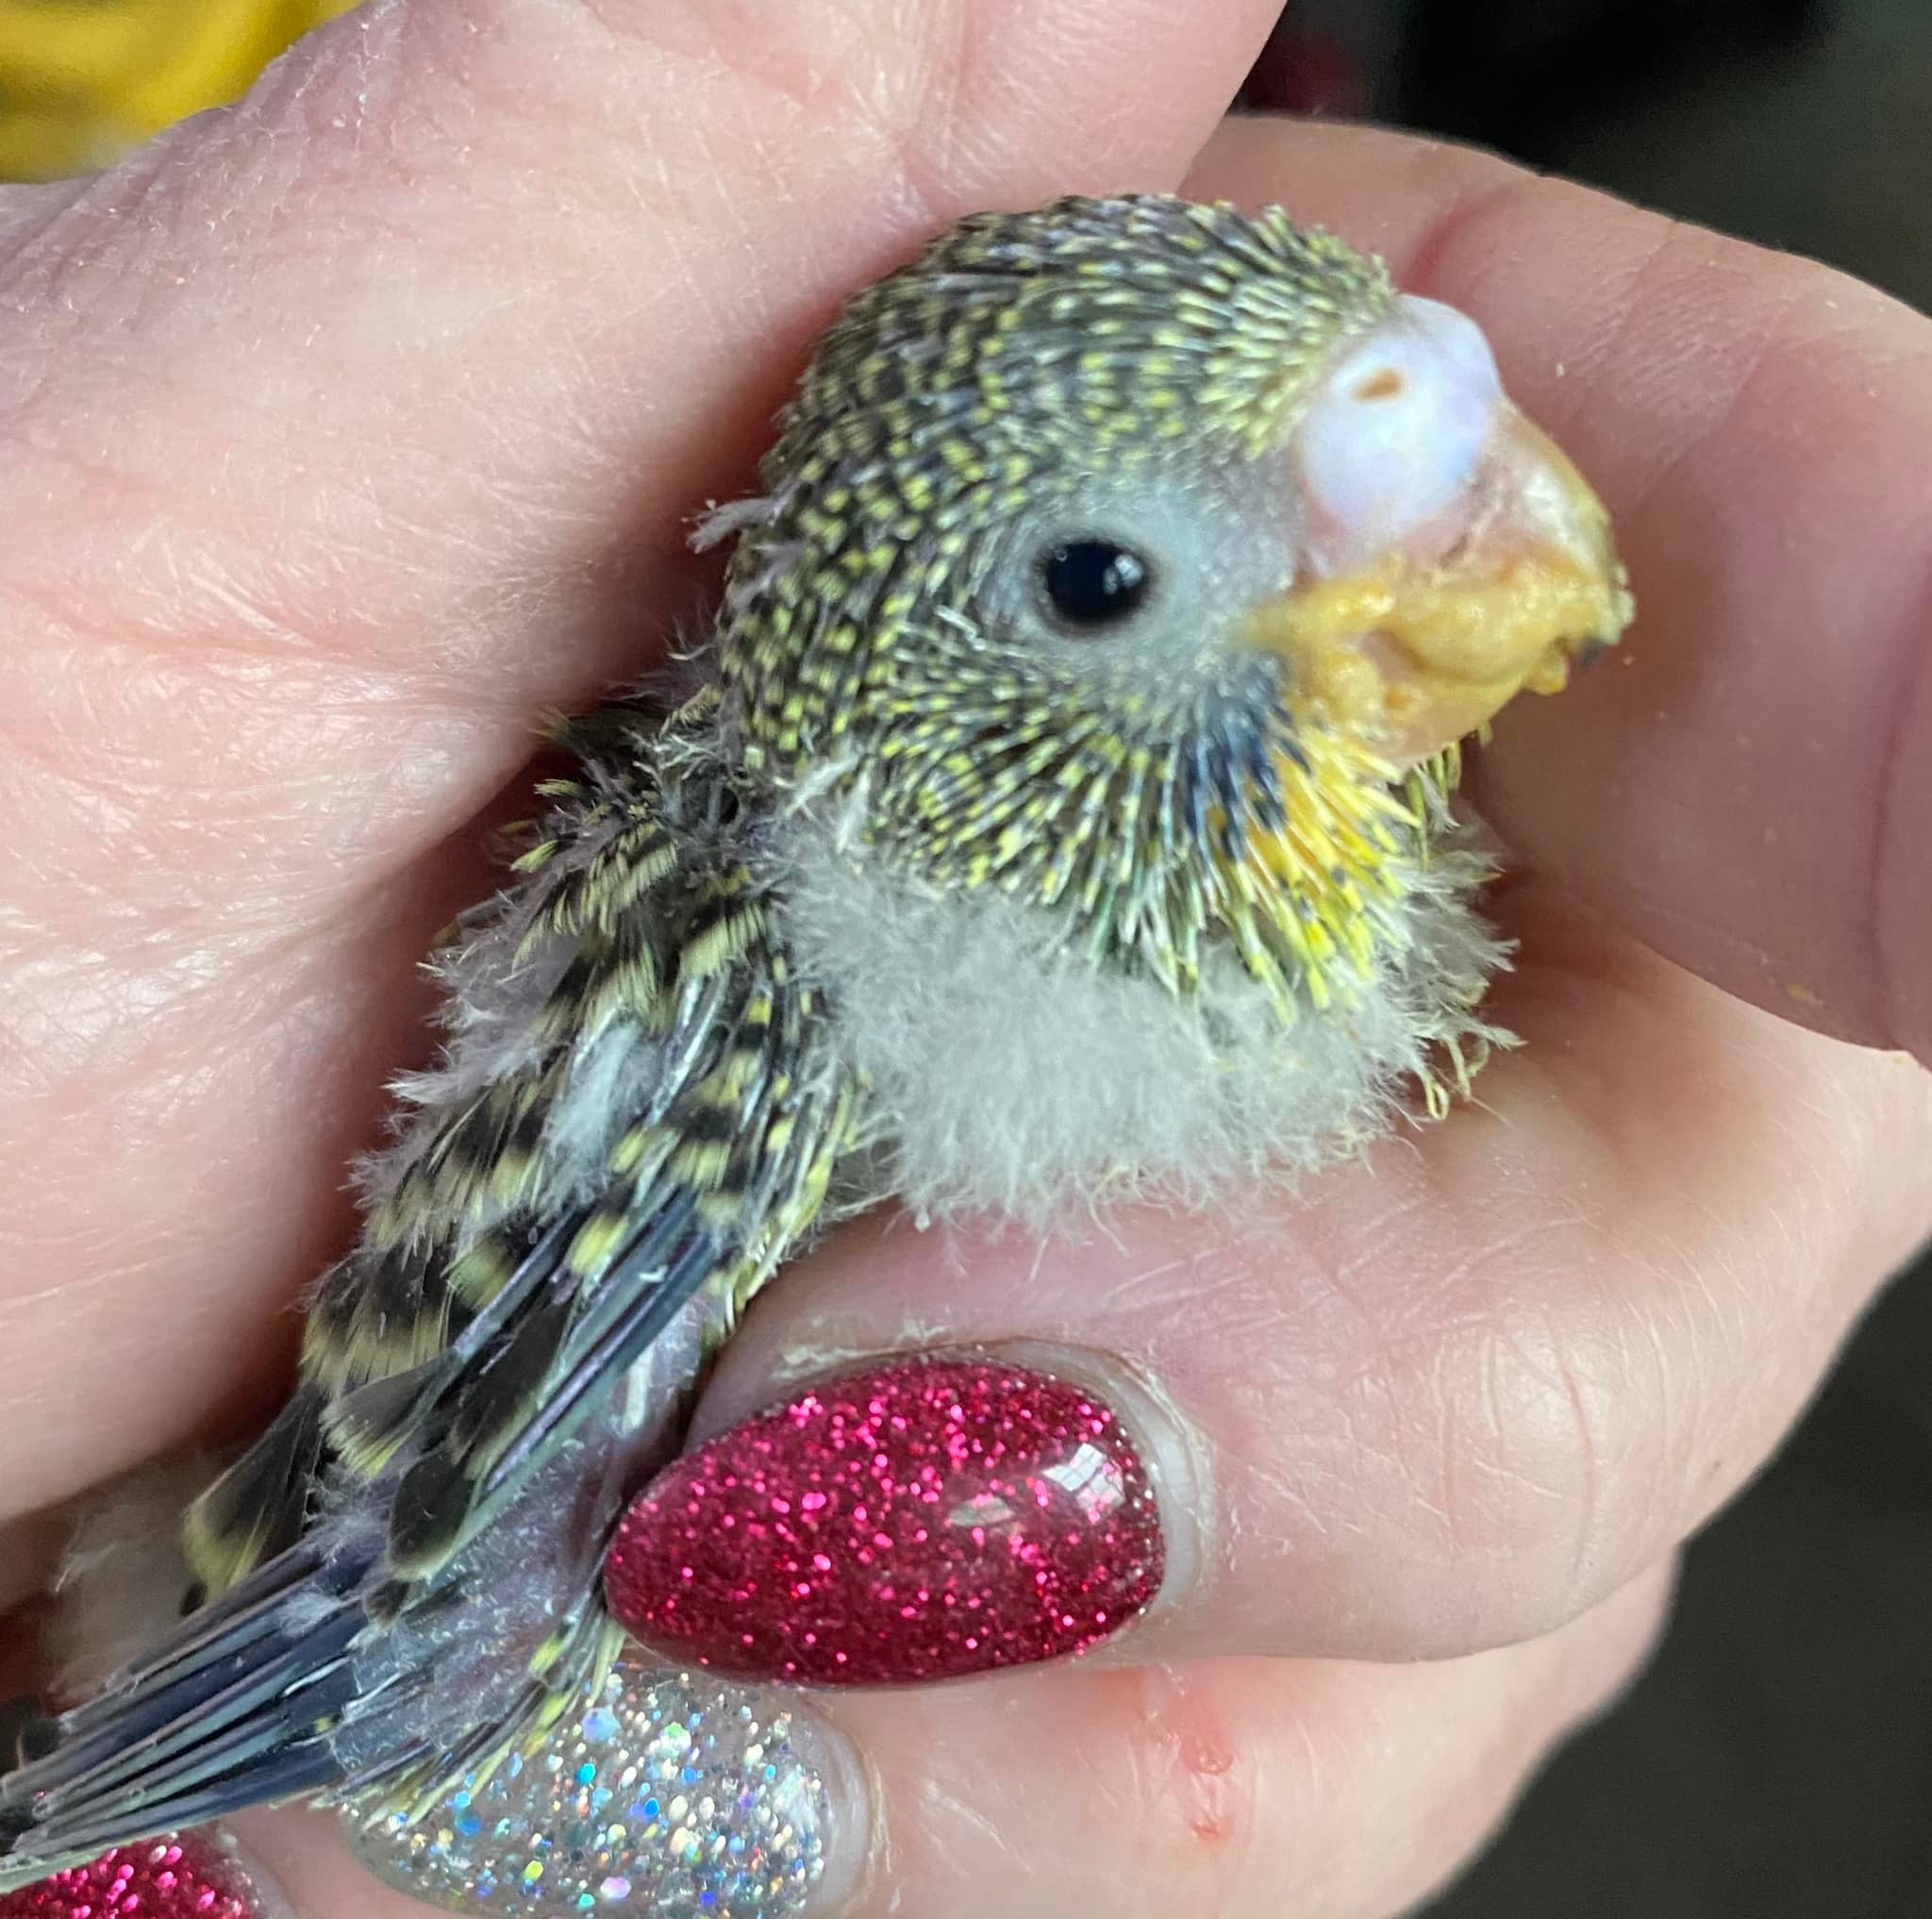 A US animal shelter received a Christmas gift they were not expecting, after more than 400 parakeets were surrendered.